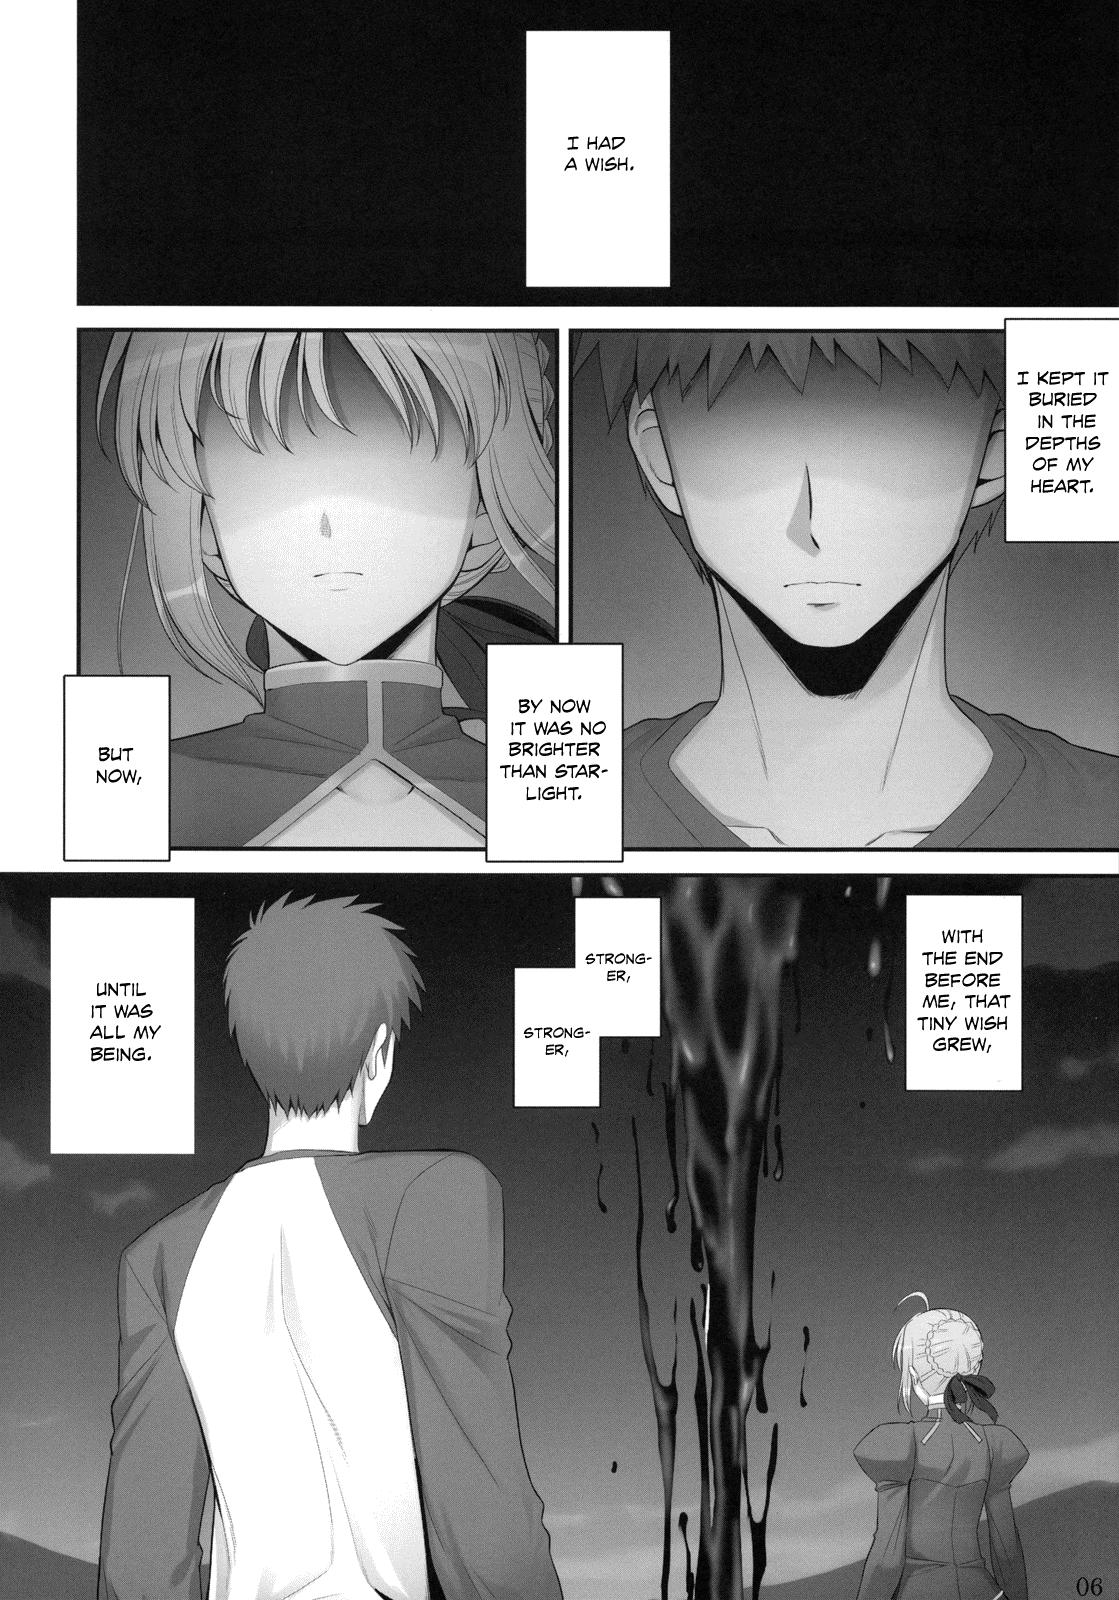 Petite Teenager RE 09 - Fate stay night Blackcocks - Page 5